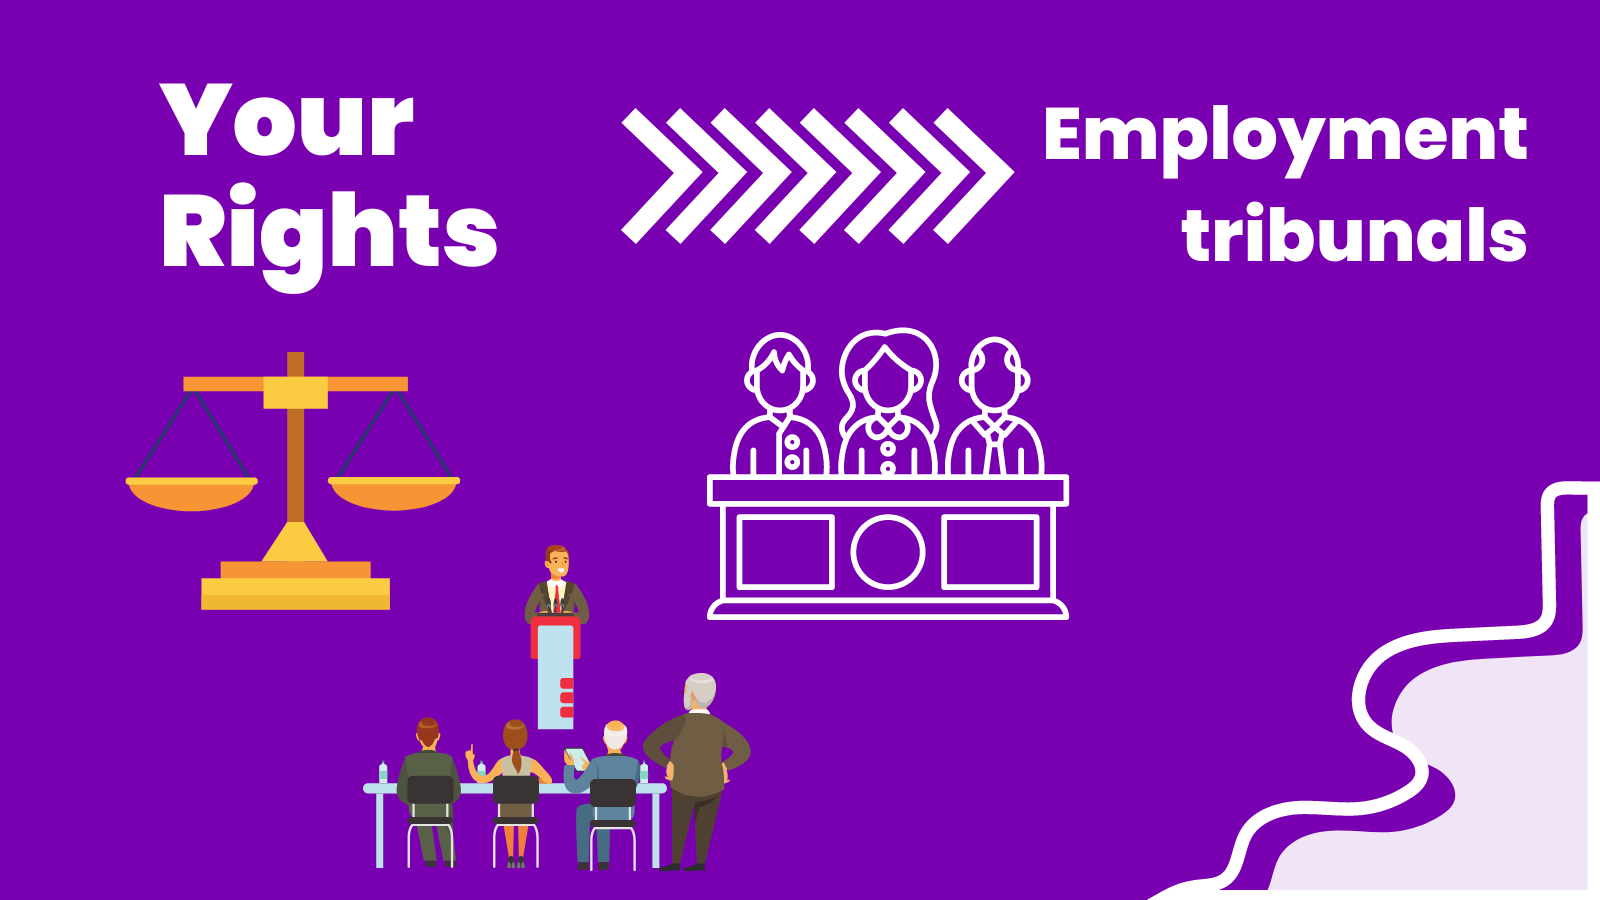 [Purple background with decorative images and white text] Know your rights - Employment tribunals